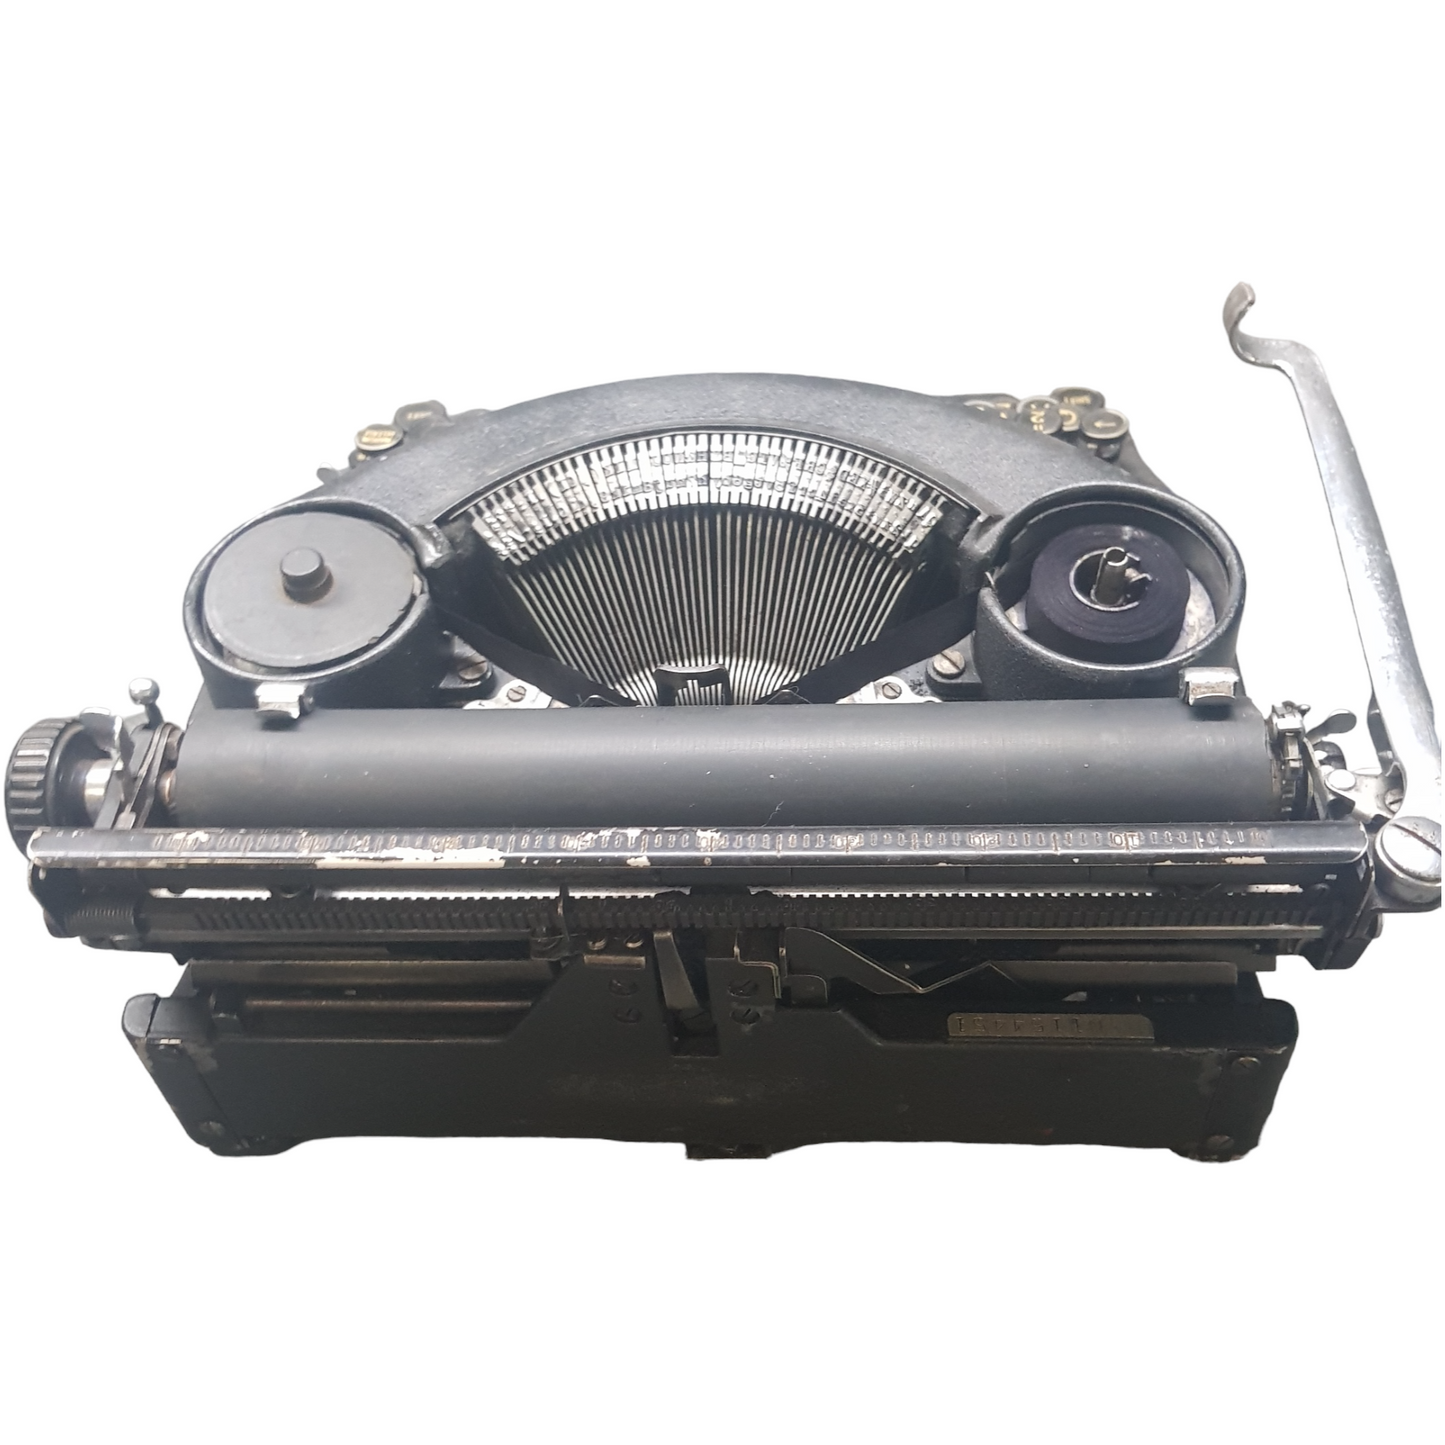 Image of Remington Noiseless Vintage Typewriter. A midsize, portable typewriter. Made in the USA with WW-II frame. Available from universaltypewritercompany.in.